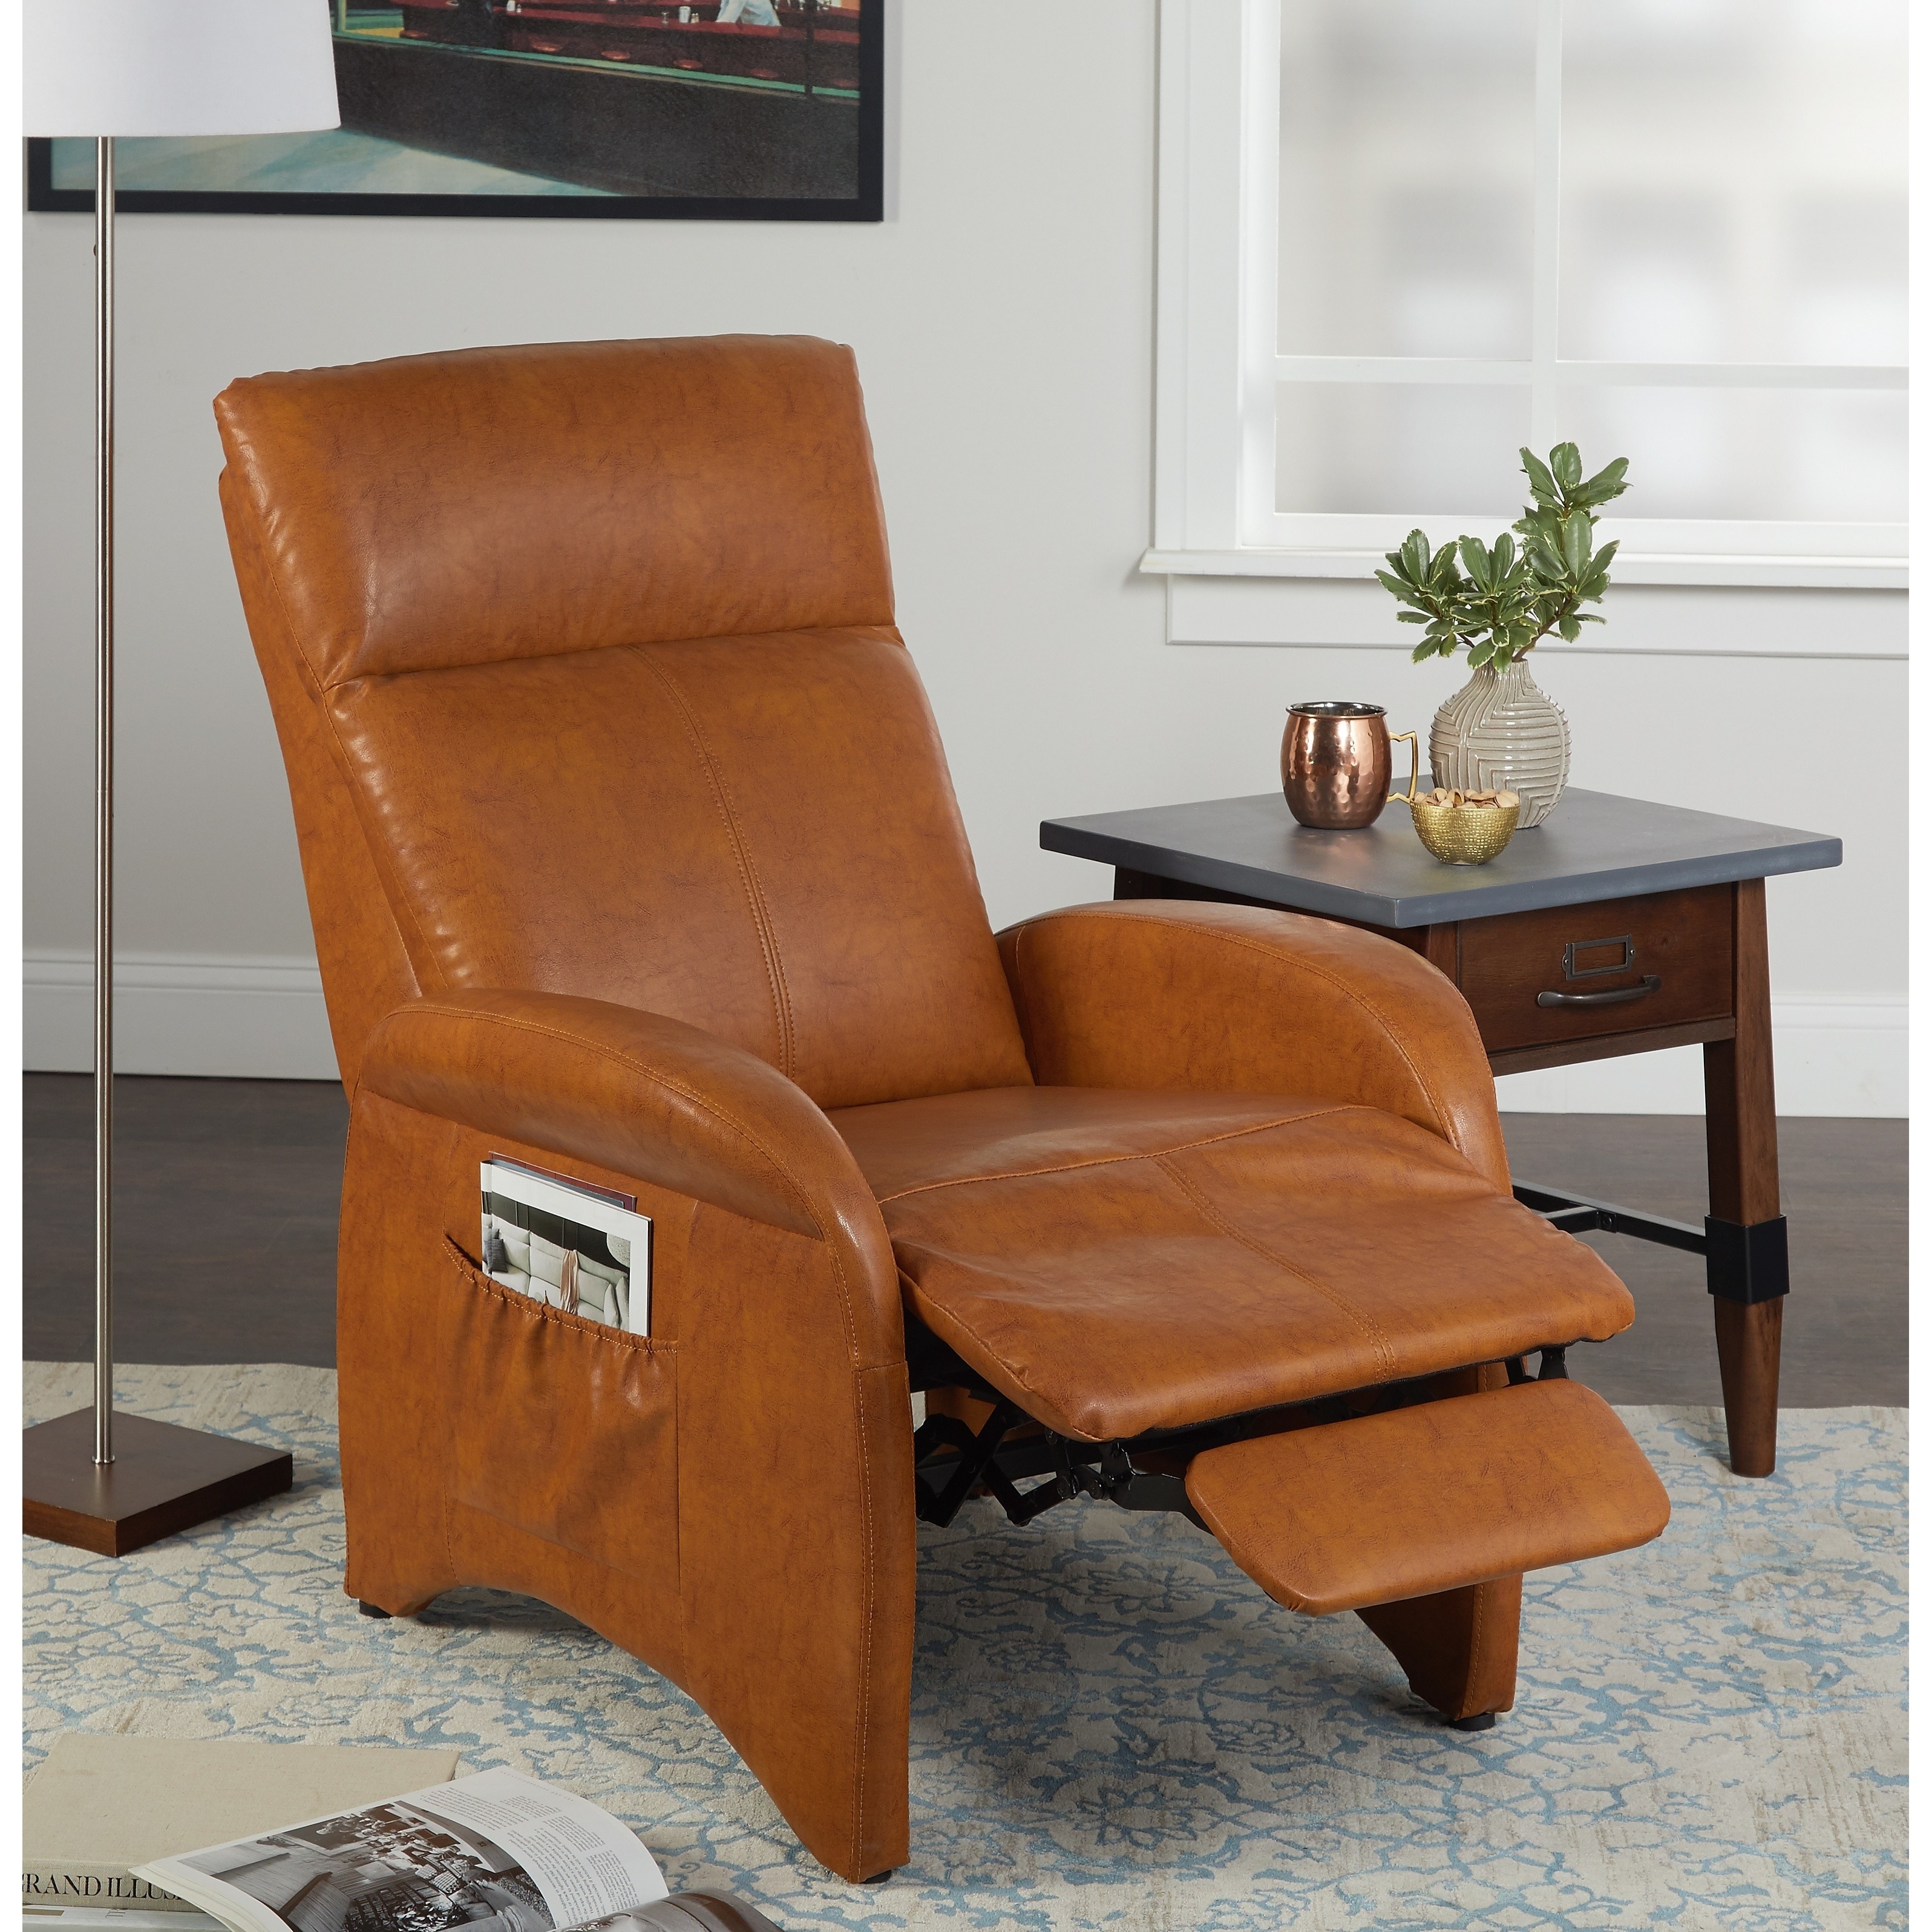 Simple Living Addin Small Reclining Accent Chair 3ba012f2 9d51 4715 88e8 264eb3c5afd1 